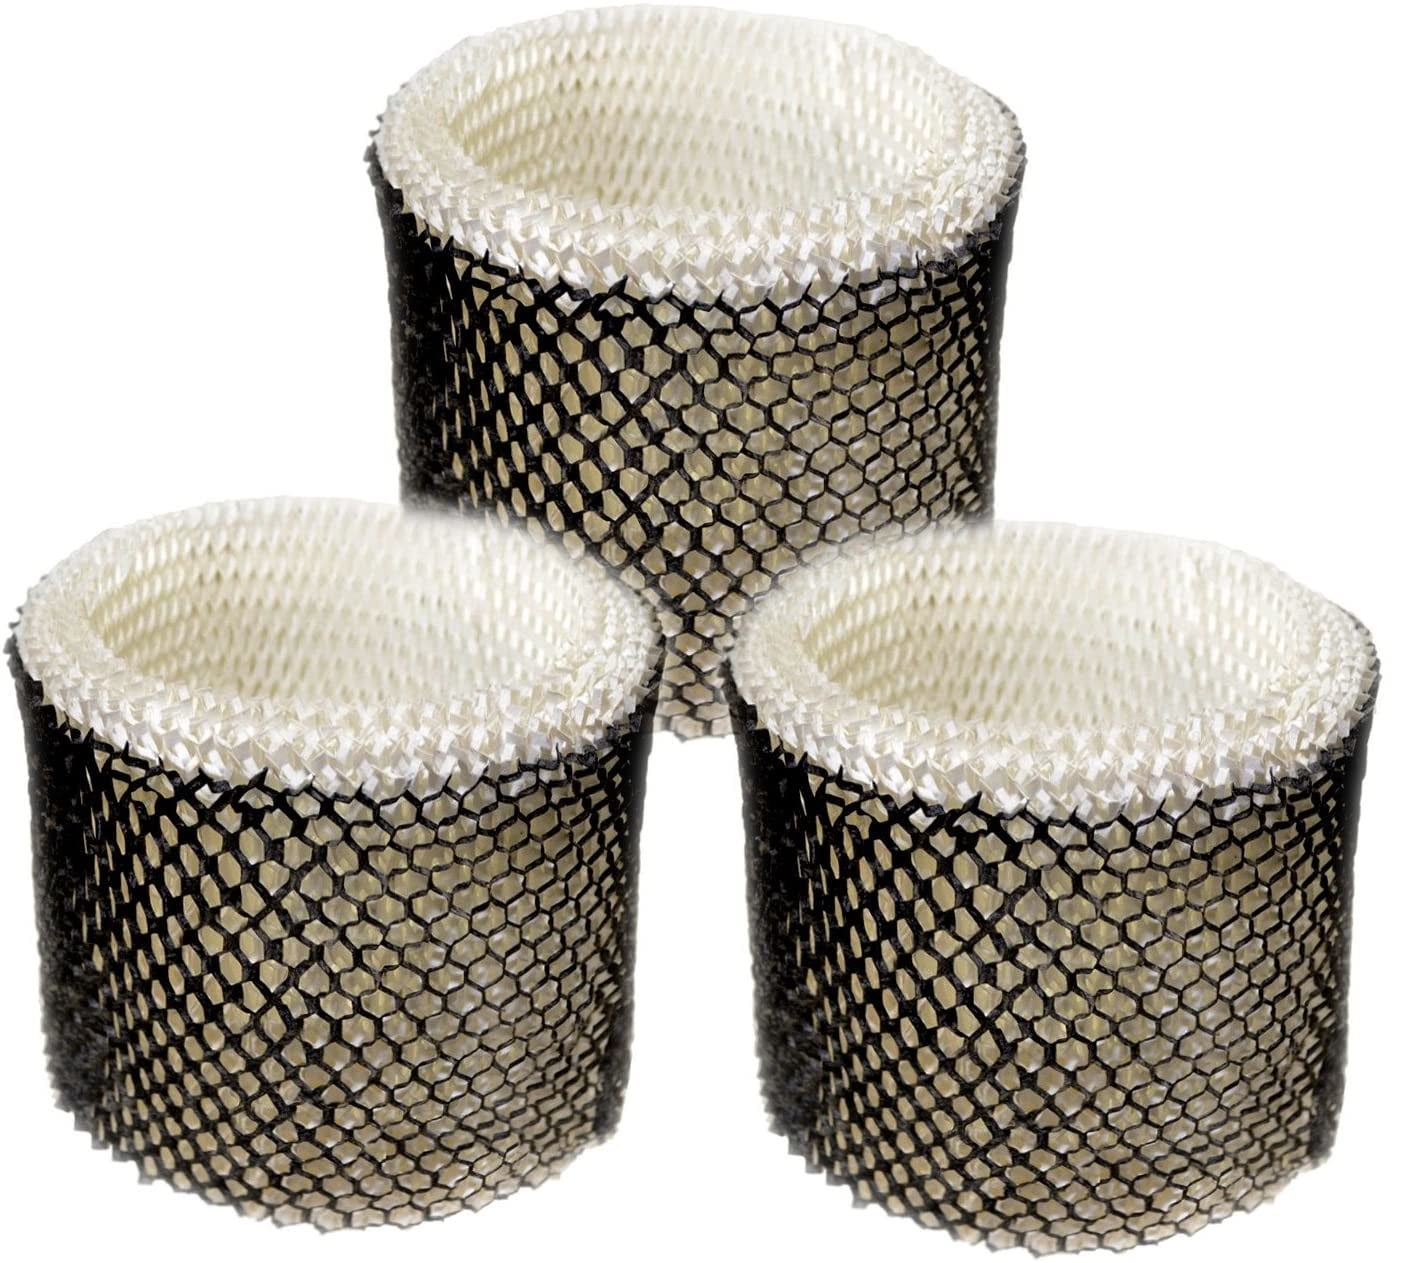 Filters Fast Brand Holmes HWF75 Wick Humidifier Filter Replacement 